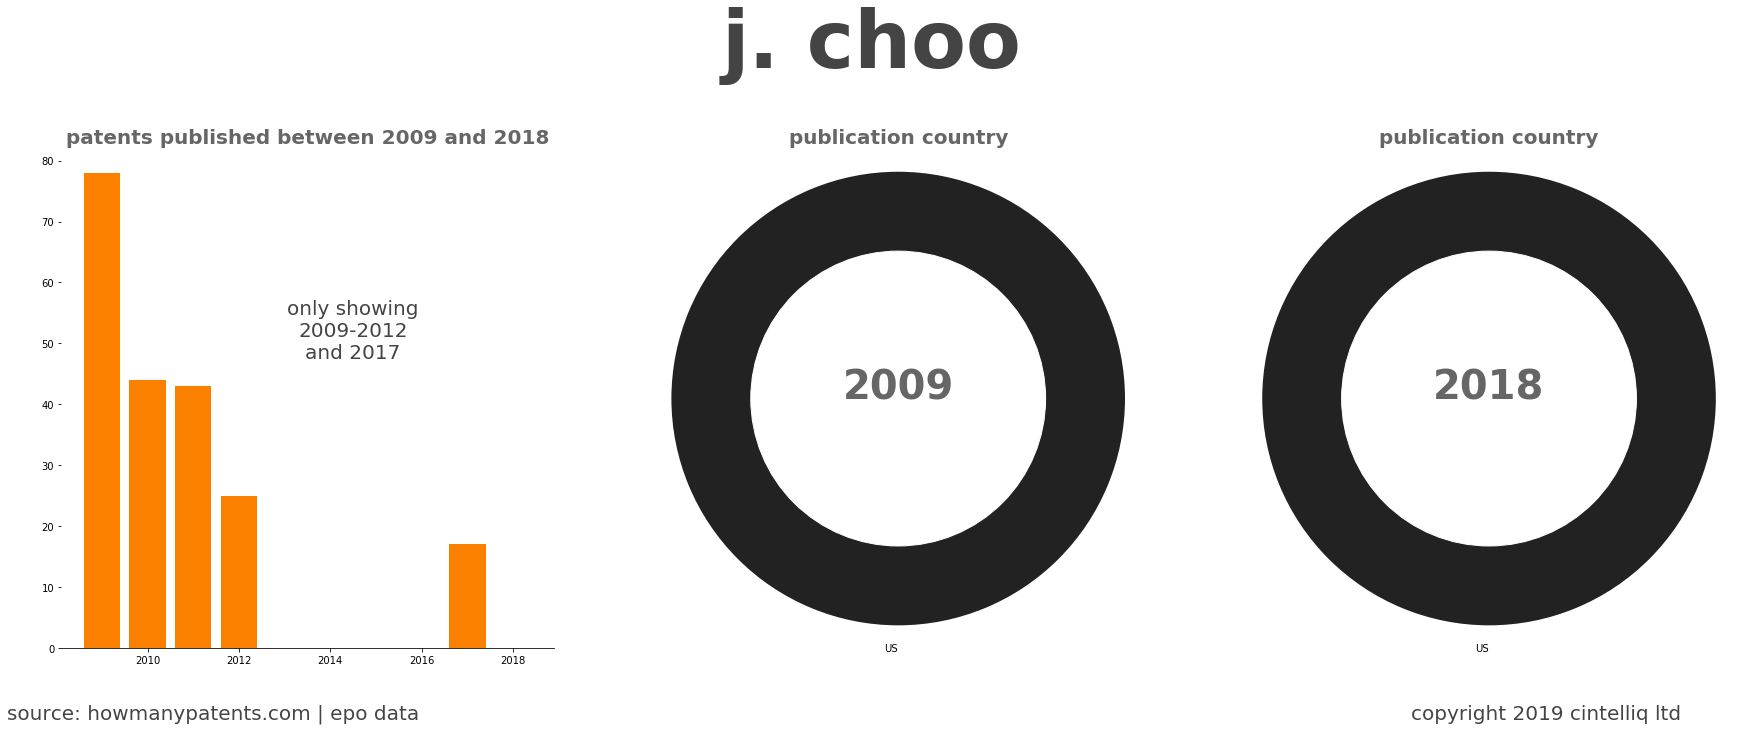 summary of patents for J. Choo